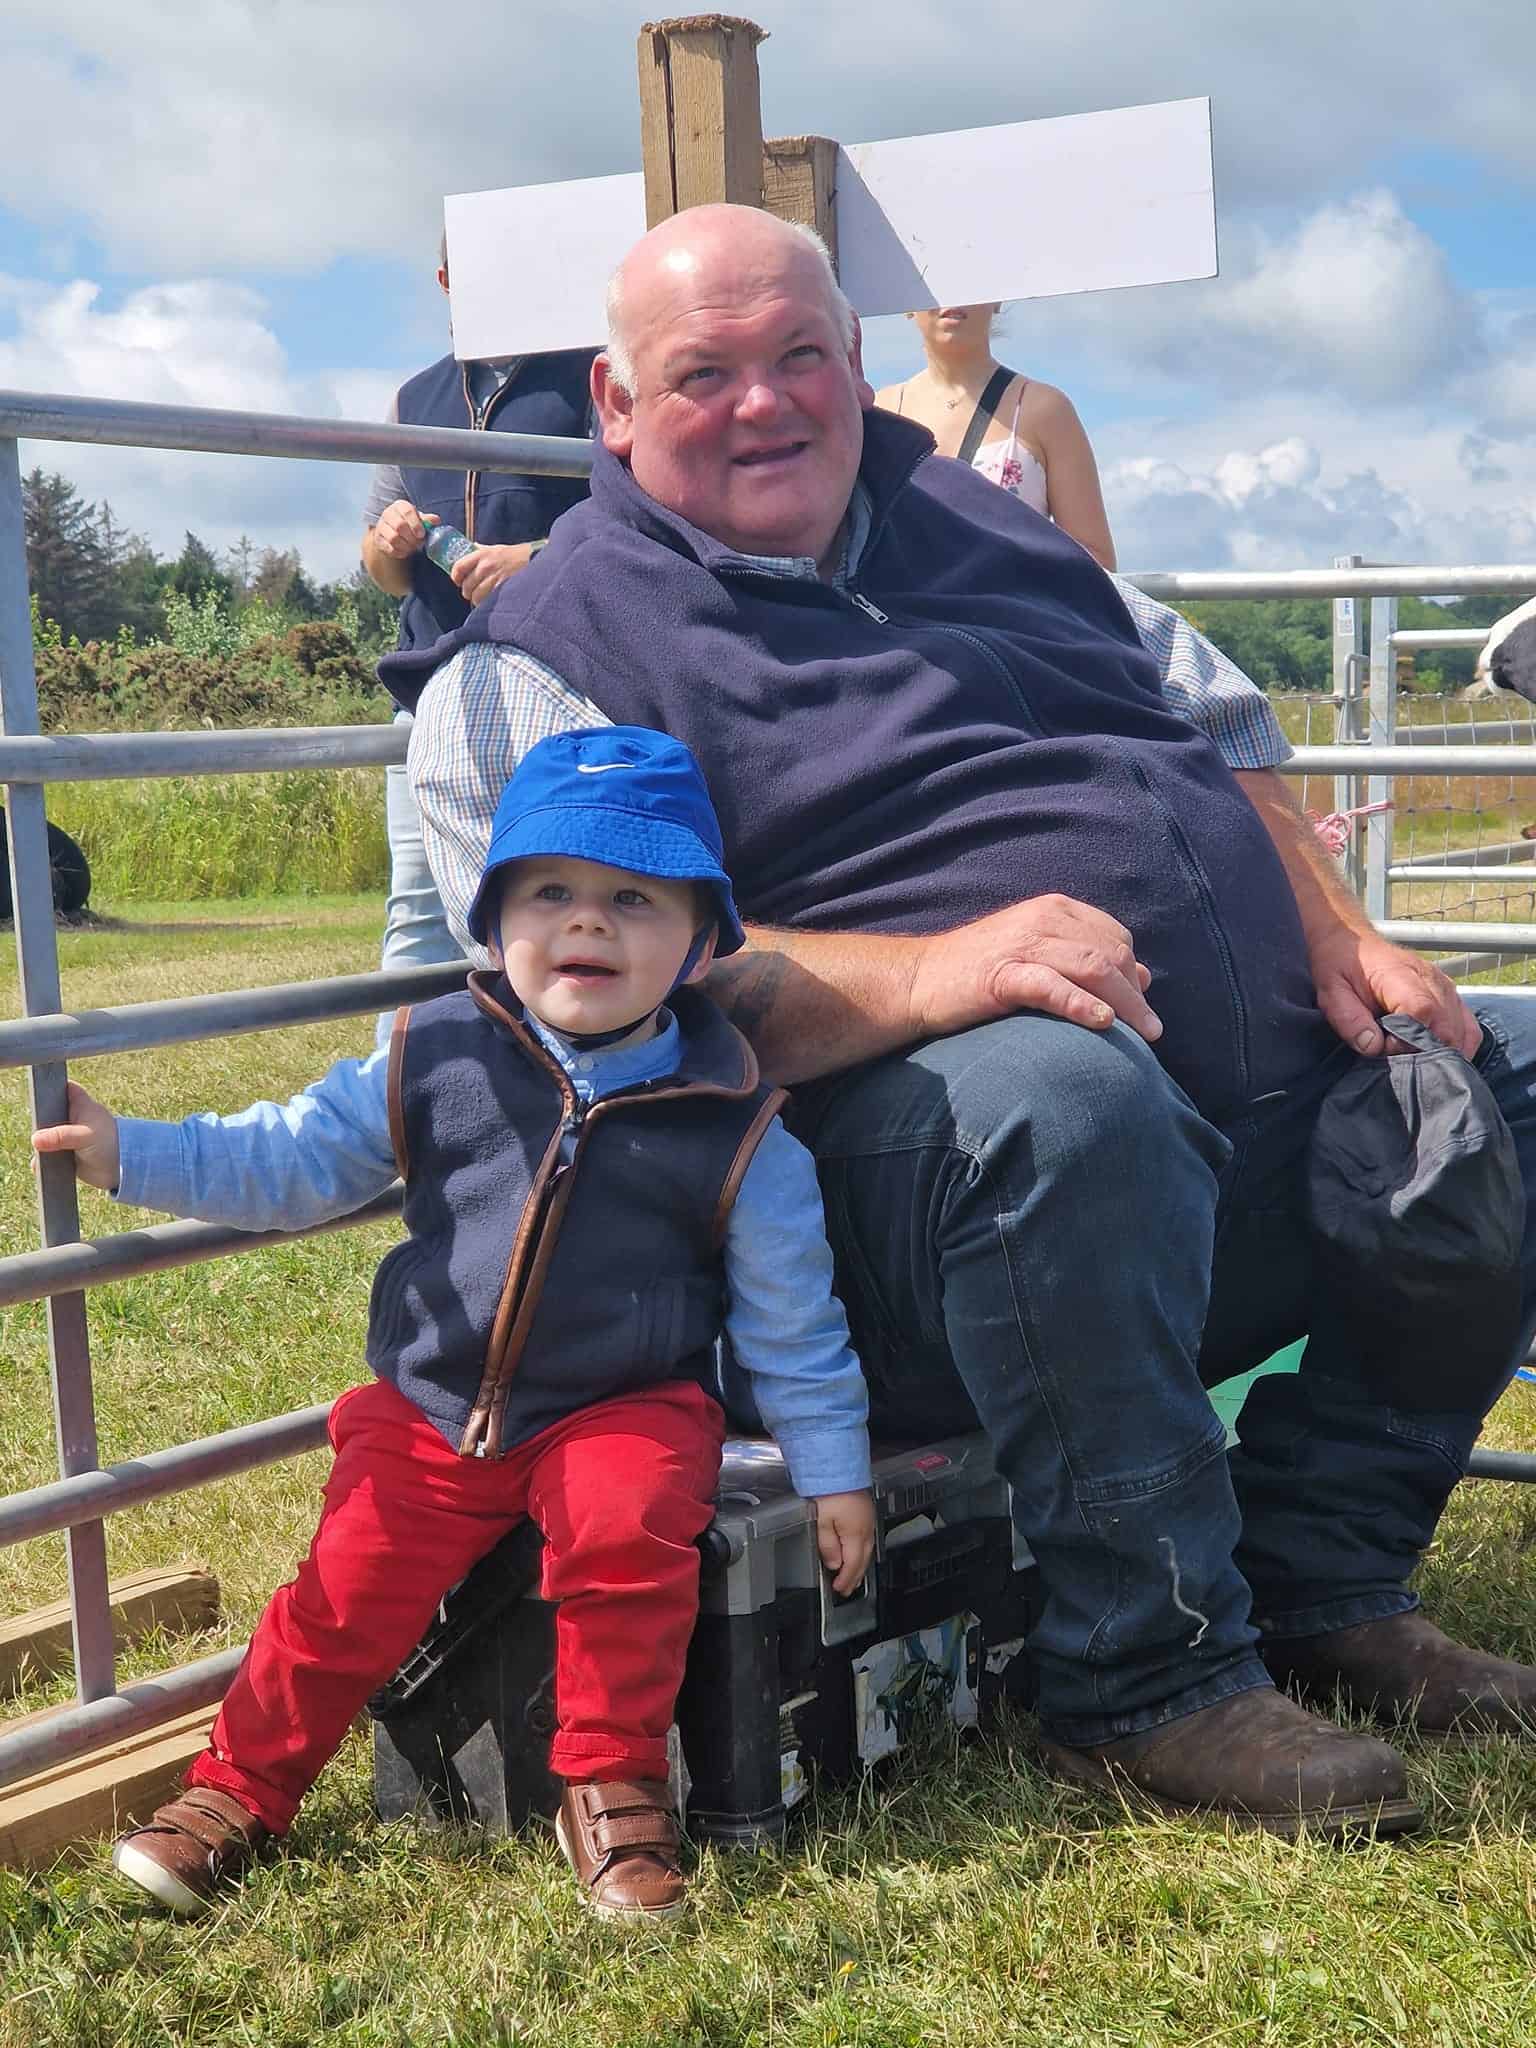 C:\Users\Clive\Downloads\Scott Dalrymple with 20 month old Gordon Connor at Haddington Show.jpg